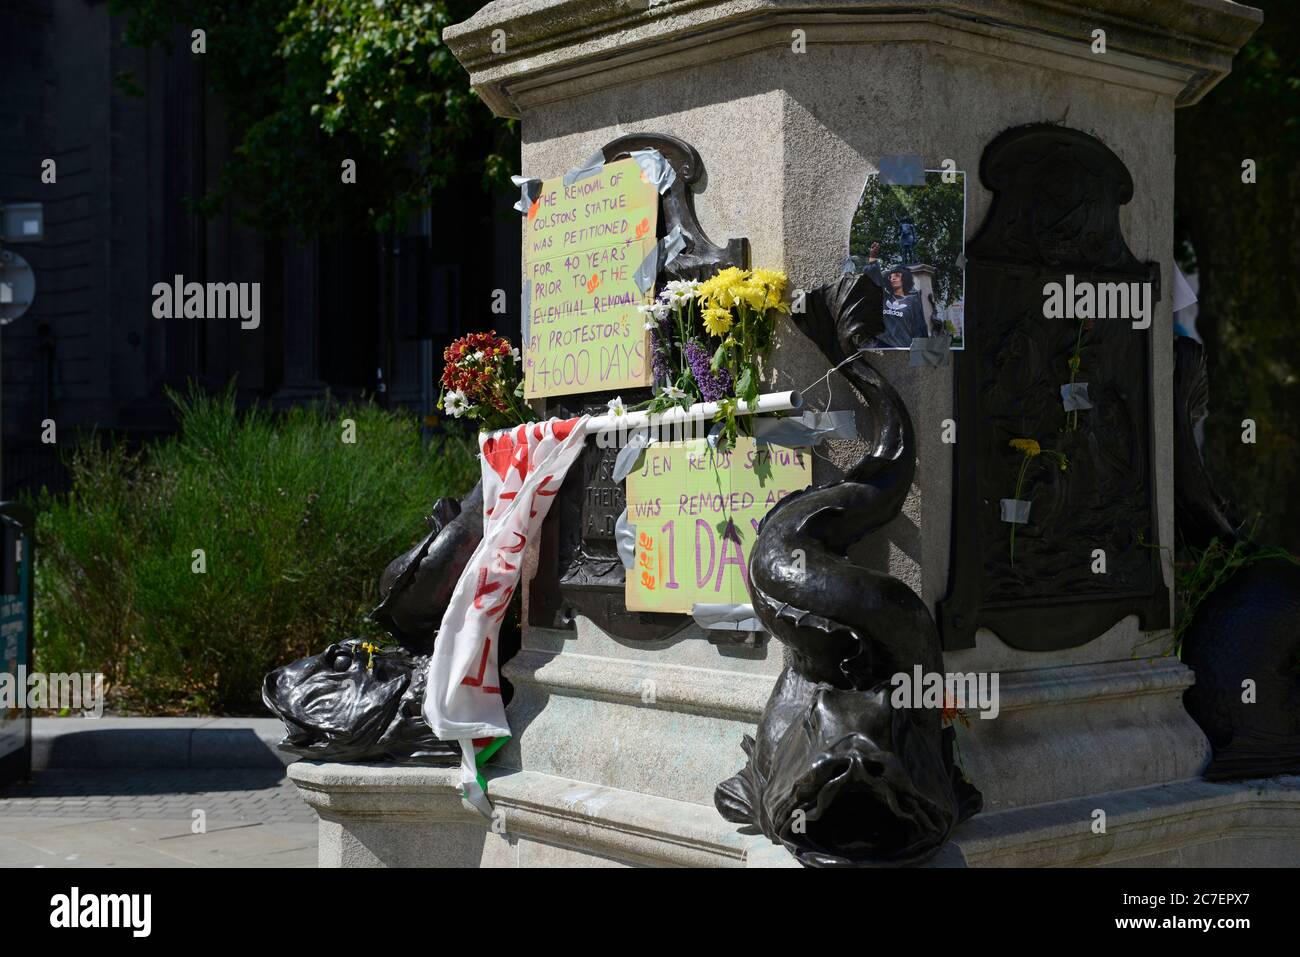 The plinth on which the 'A Surge of Power (Jen Reid)' statue stood  for just one day in July 2020 in Bristol, UK, after removal, with many messages. Stock Photo